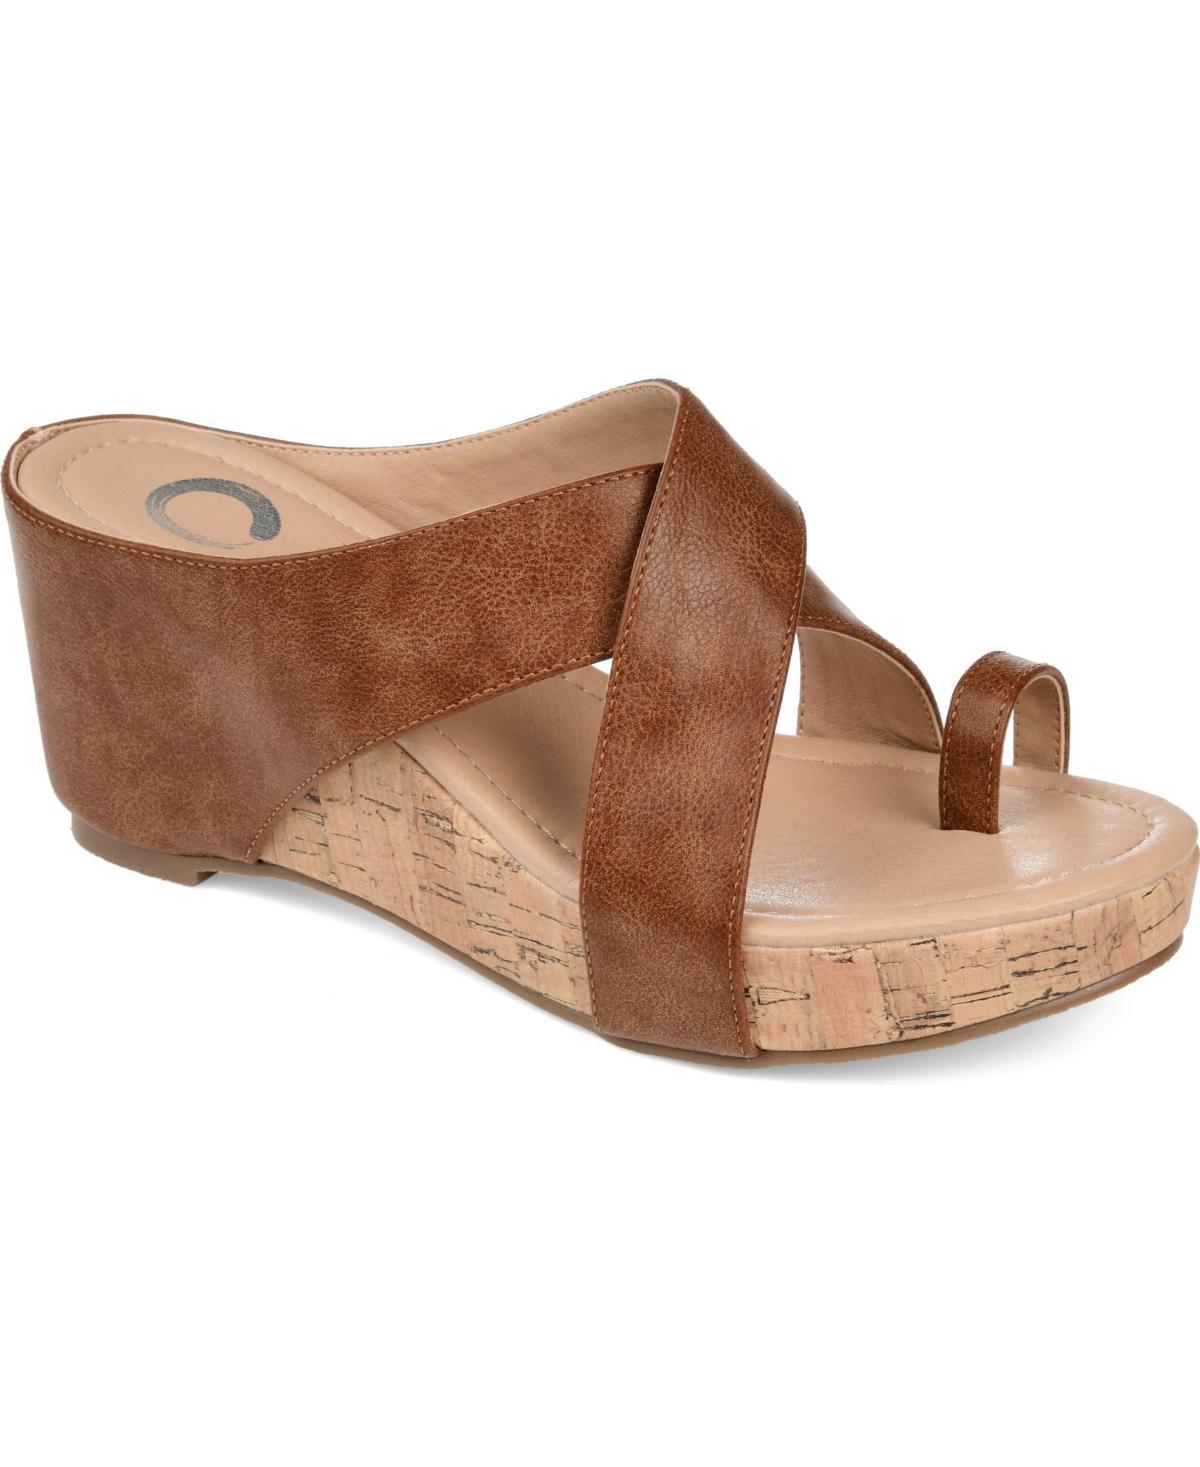 Journee Collection Rayna Womens Wedge Sandals Brown Product Image